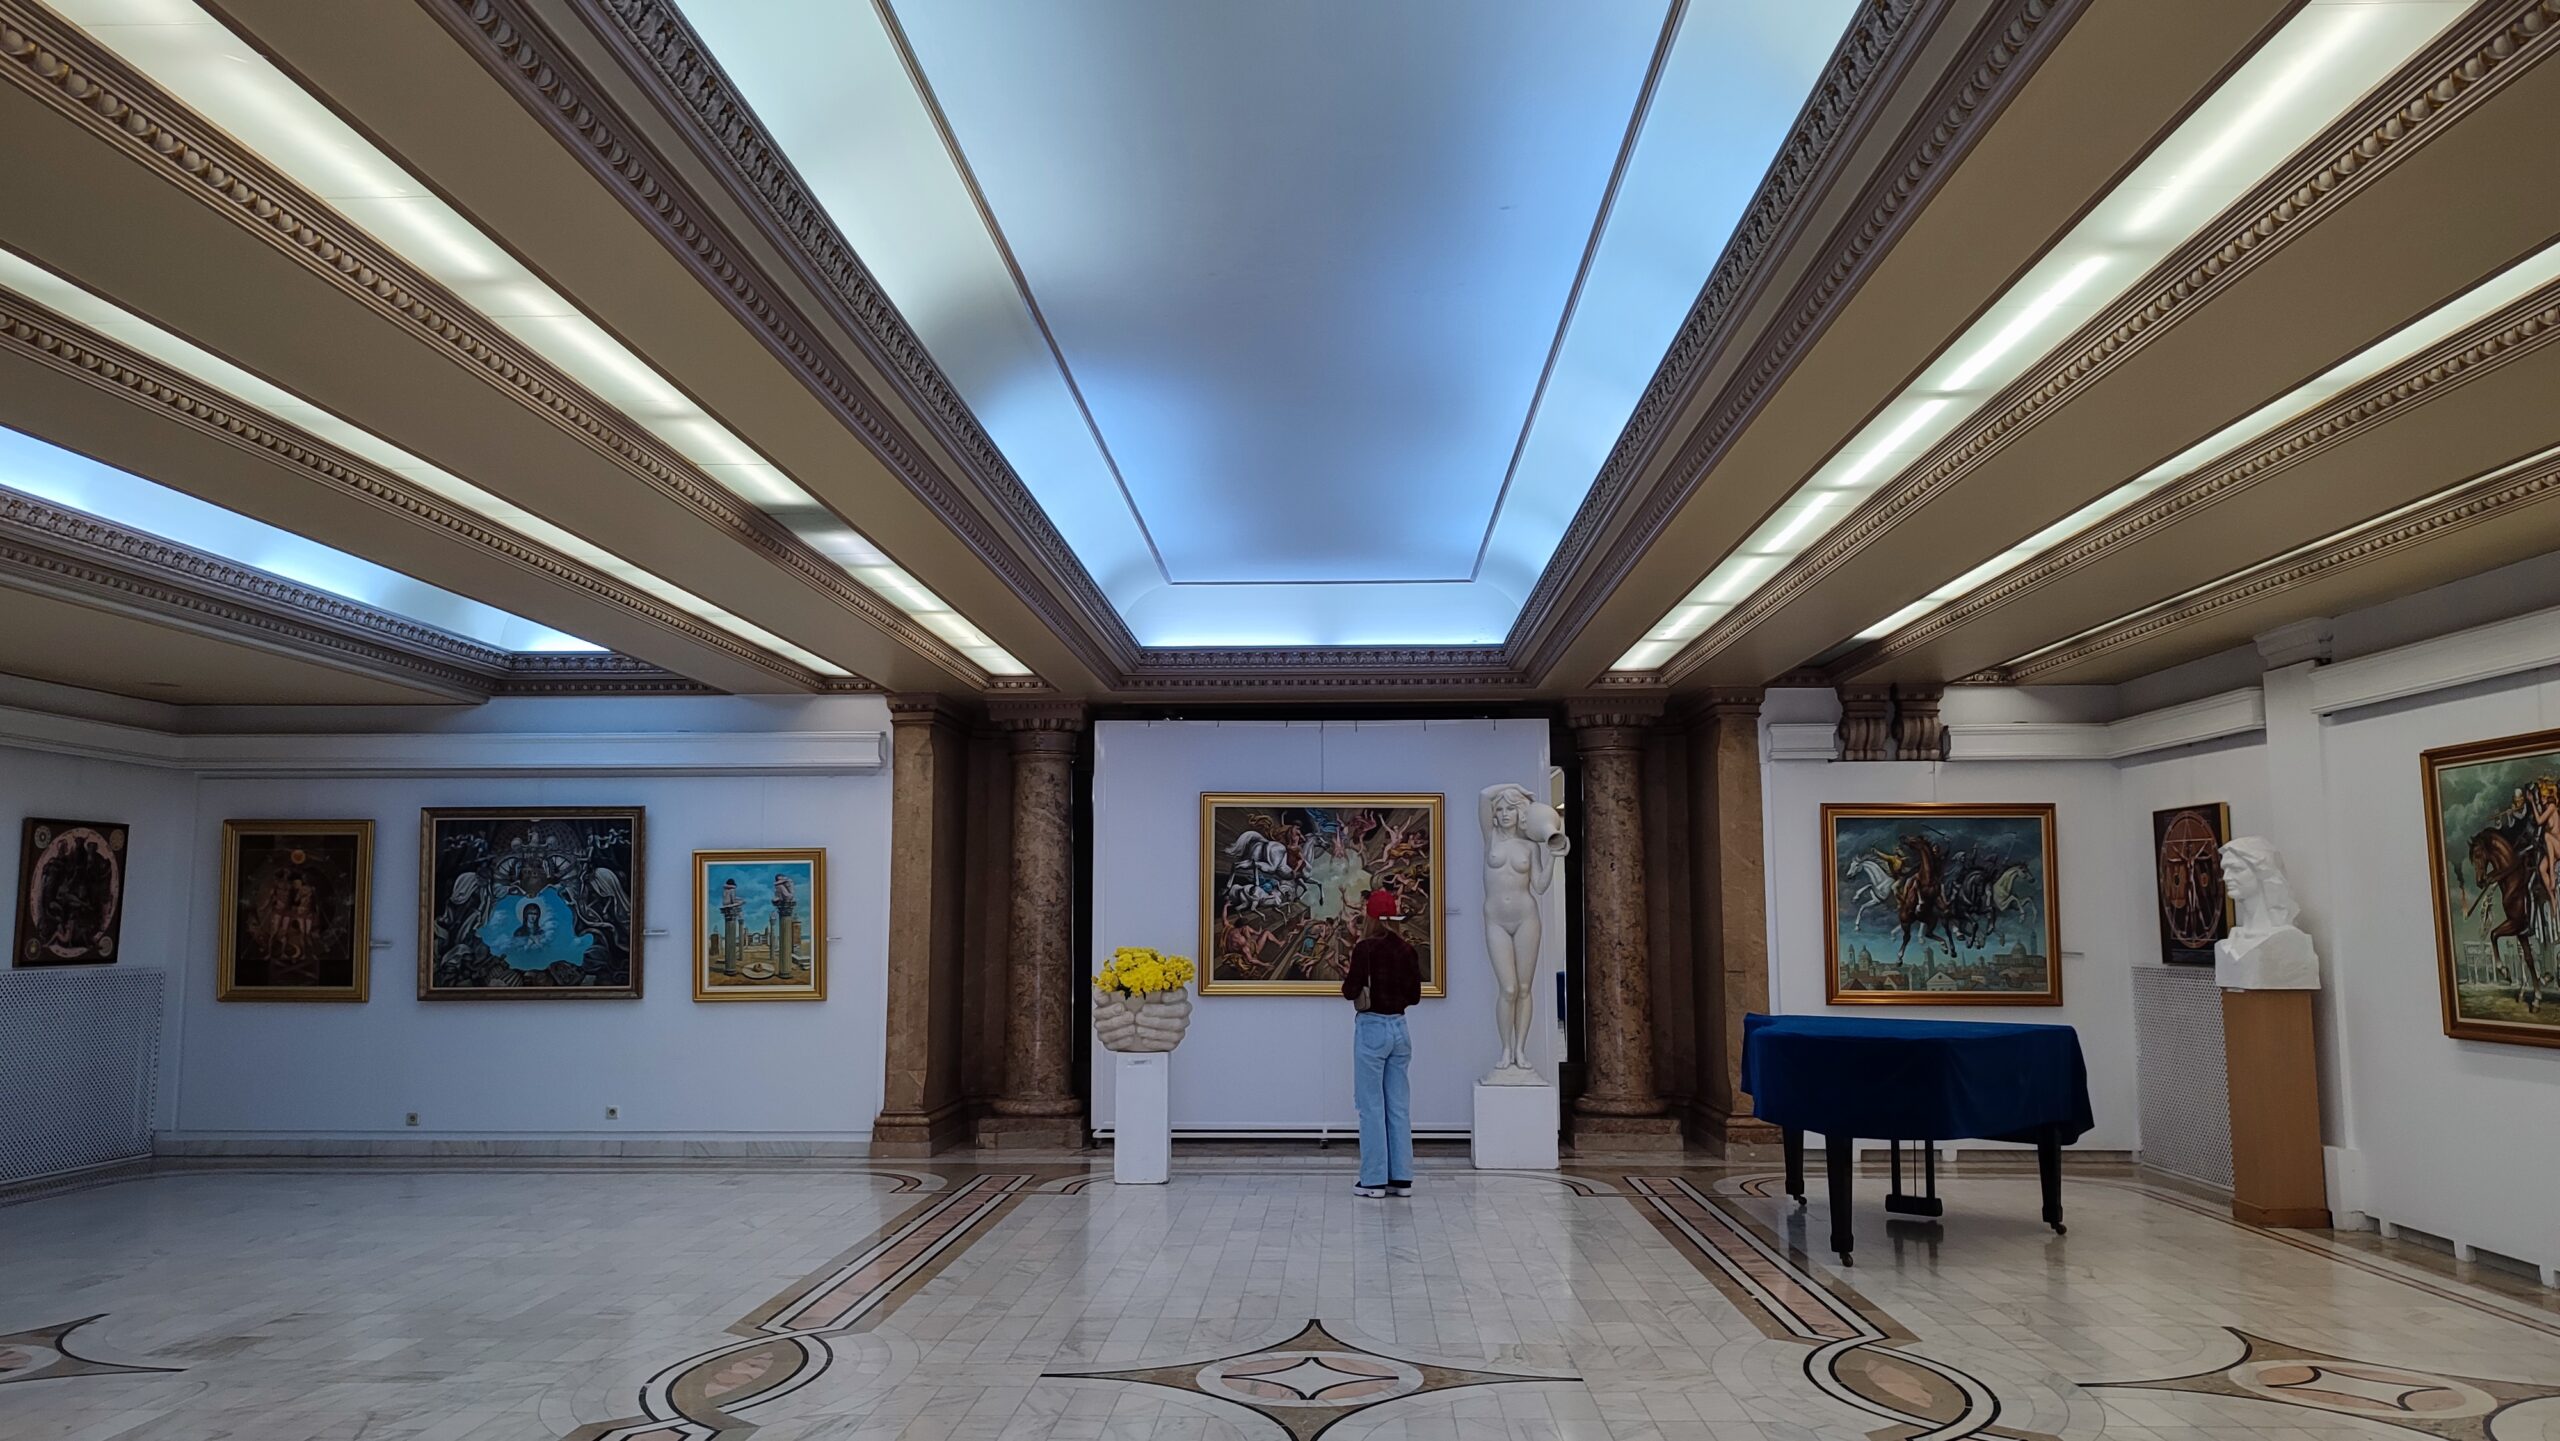 Arts Gallery exposition room at the Military Circle